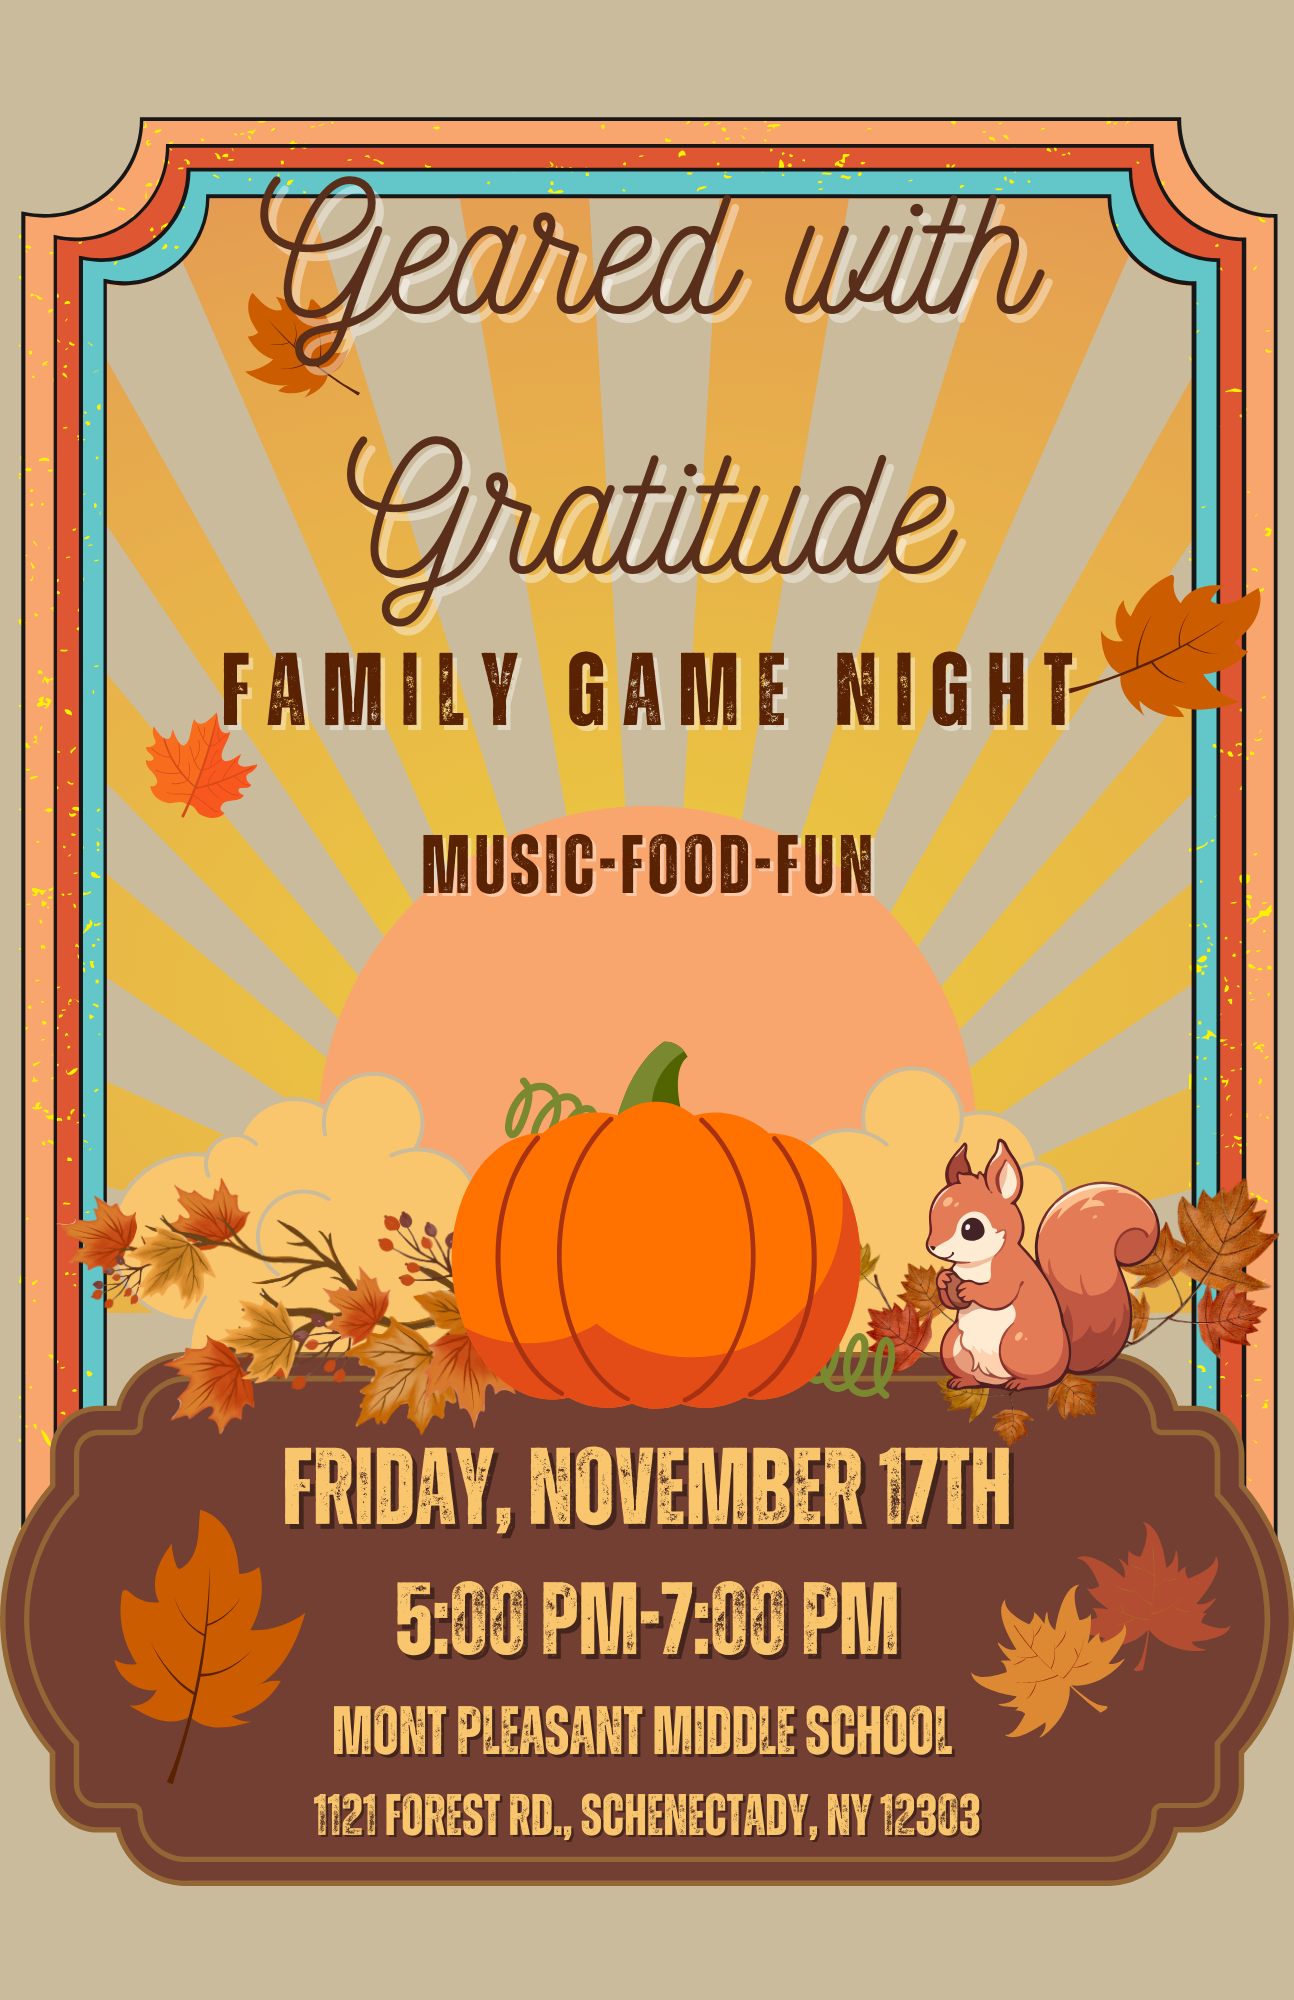 Flyer:  Geared with Gratitude Family Game Night